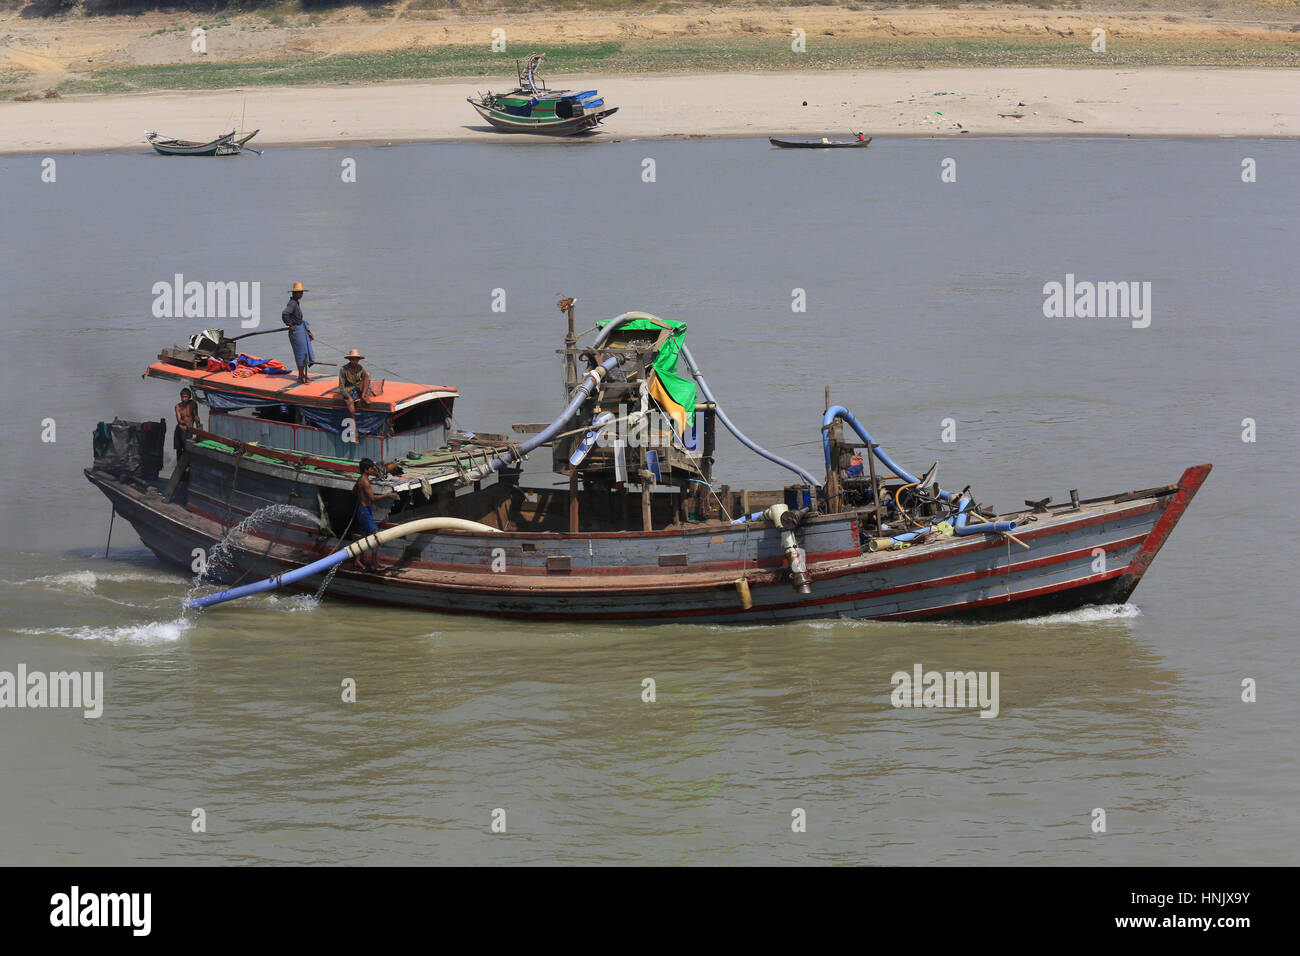 A river dredge boat operating on the Irrawaddy River in Myanmar (Burma). These are often used for gold sluicing or gravel mining. Stock Photo